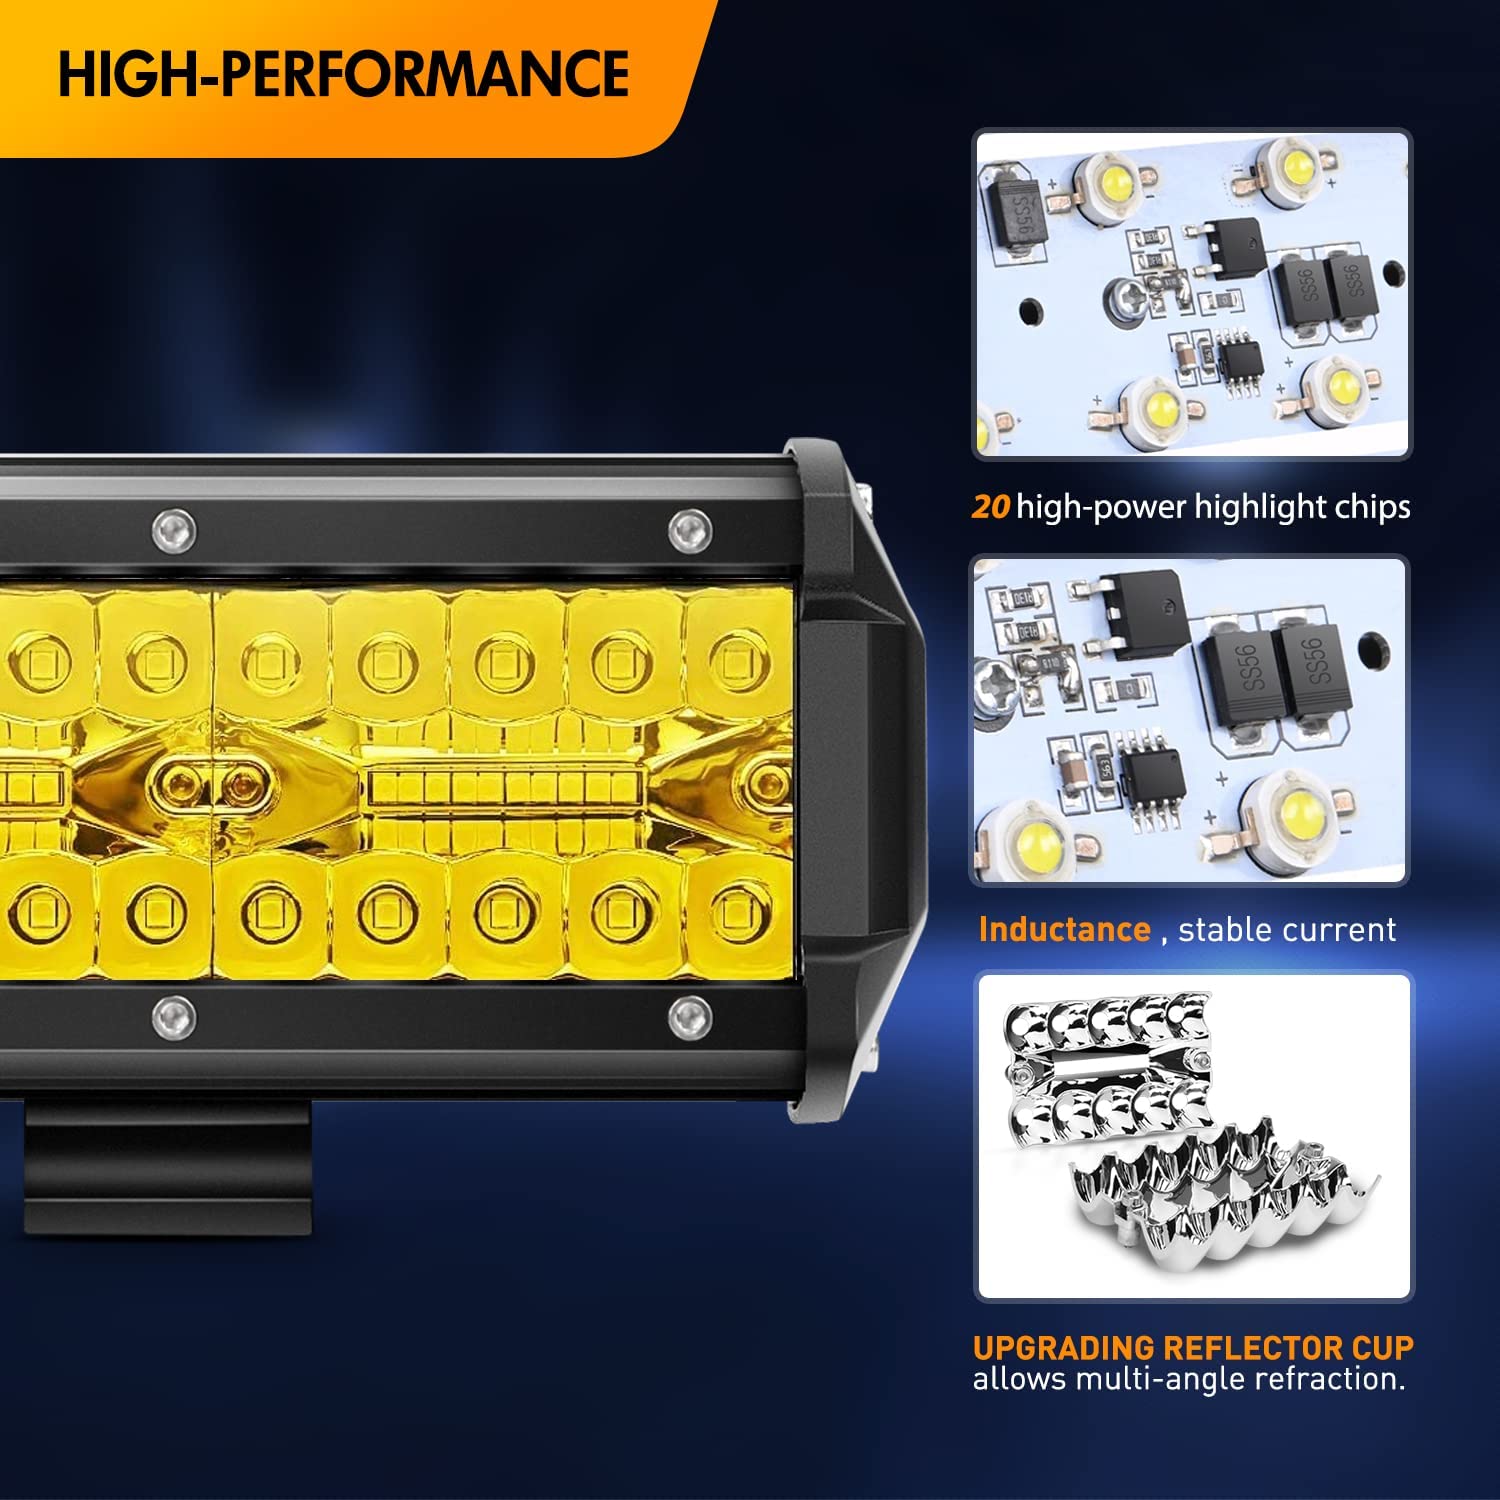 20 Inch 420W 42000LM Amber Triple Row Flood Spot Combo LED Light Bar with 16AWG 3Pin Rocker Switch Wiring Harness kit